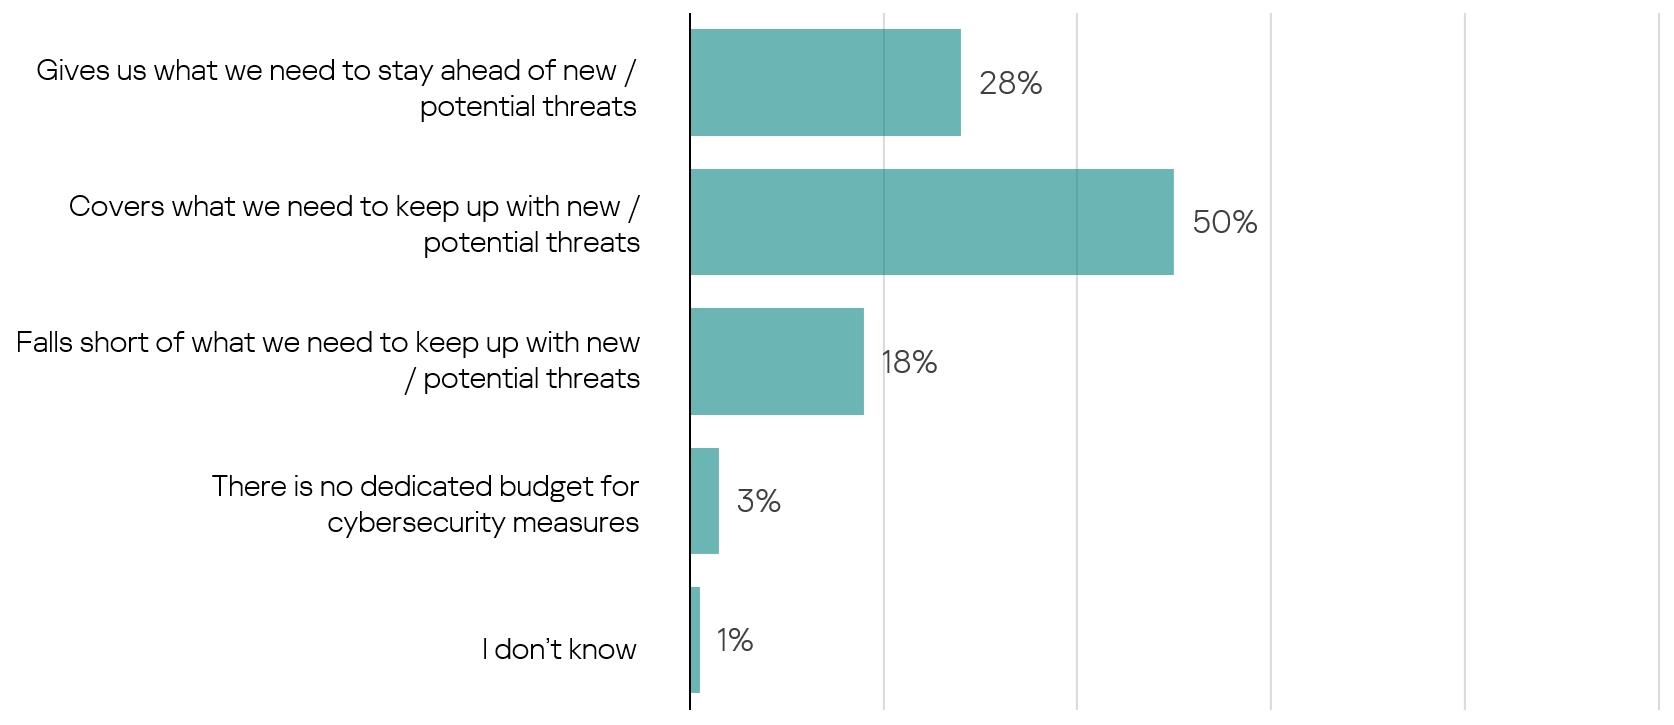 Would you say the budget for cybersecurity measures in your company ...?